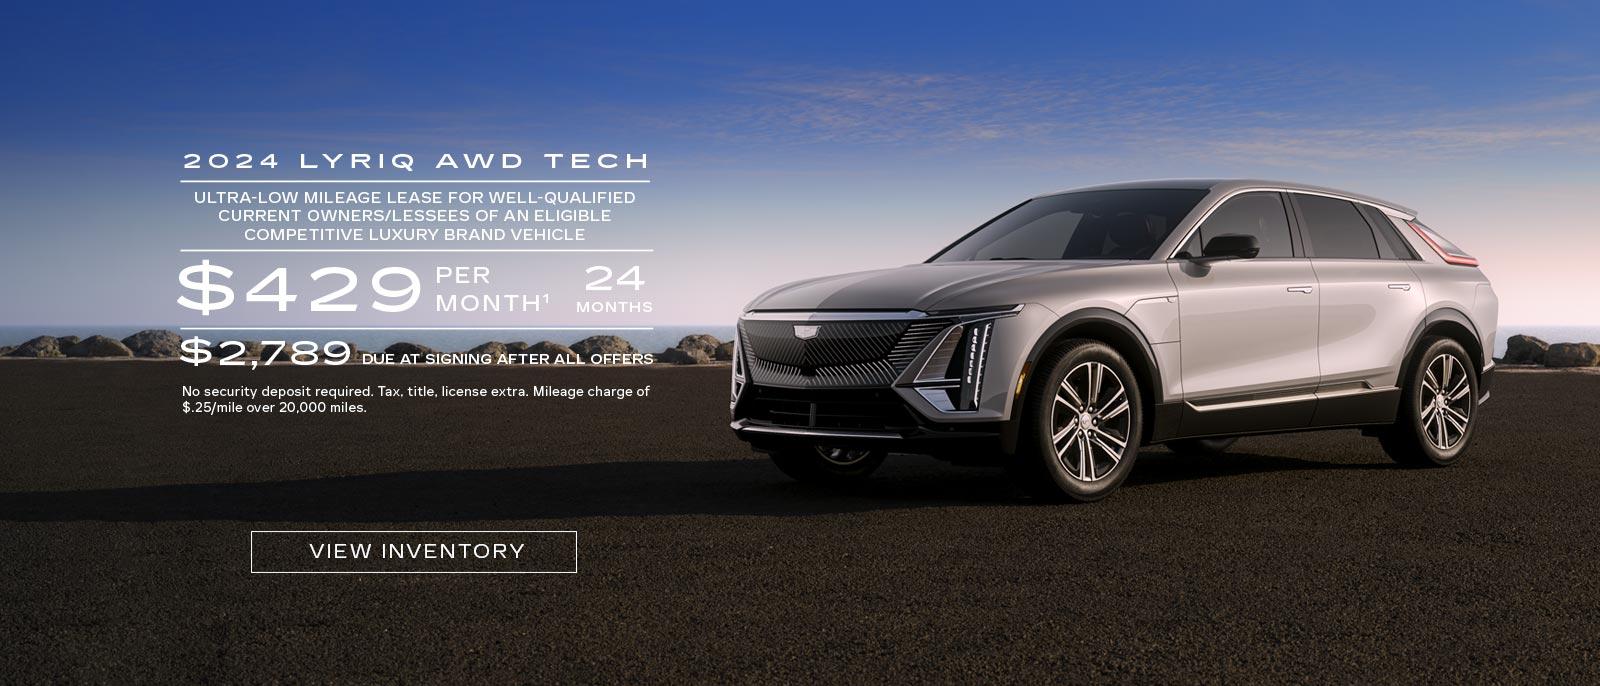 2024 LYRIQ AWD TECH. Ultra-low mileage lease for well-qualified current owners/lessees of an eligible competitive luxury brand vehicle.  $429 per month. 24 months. $2,789 due at signing after all offers.